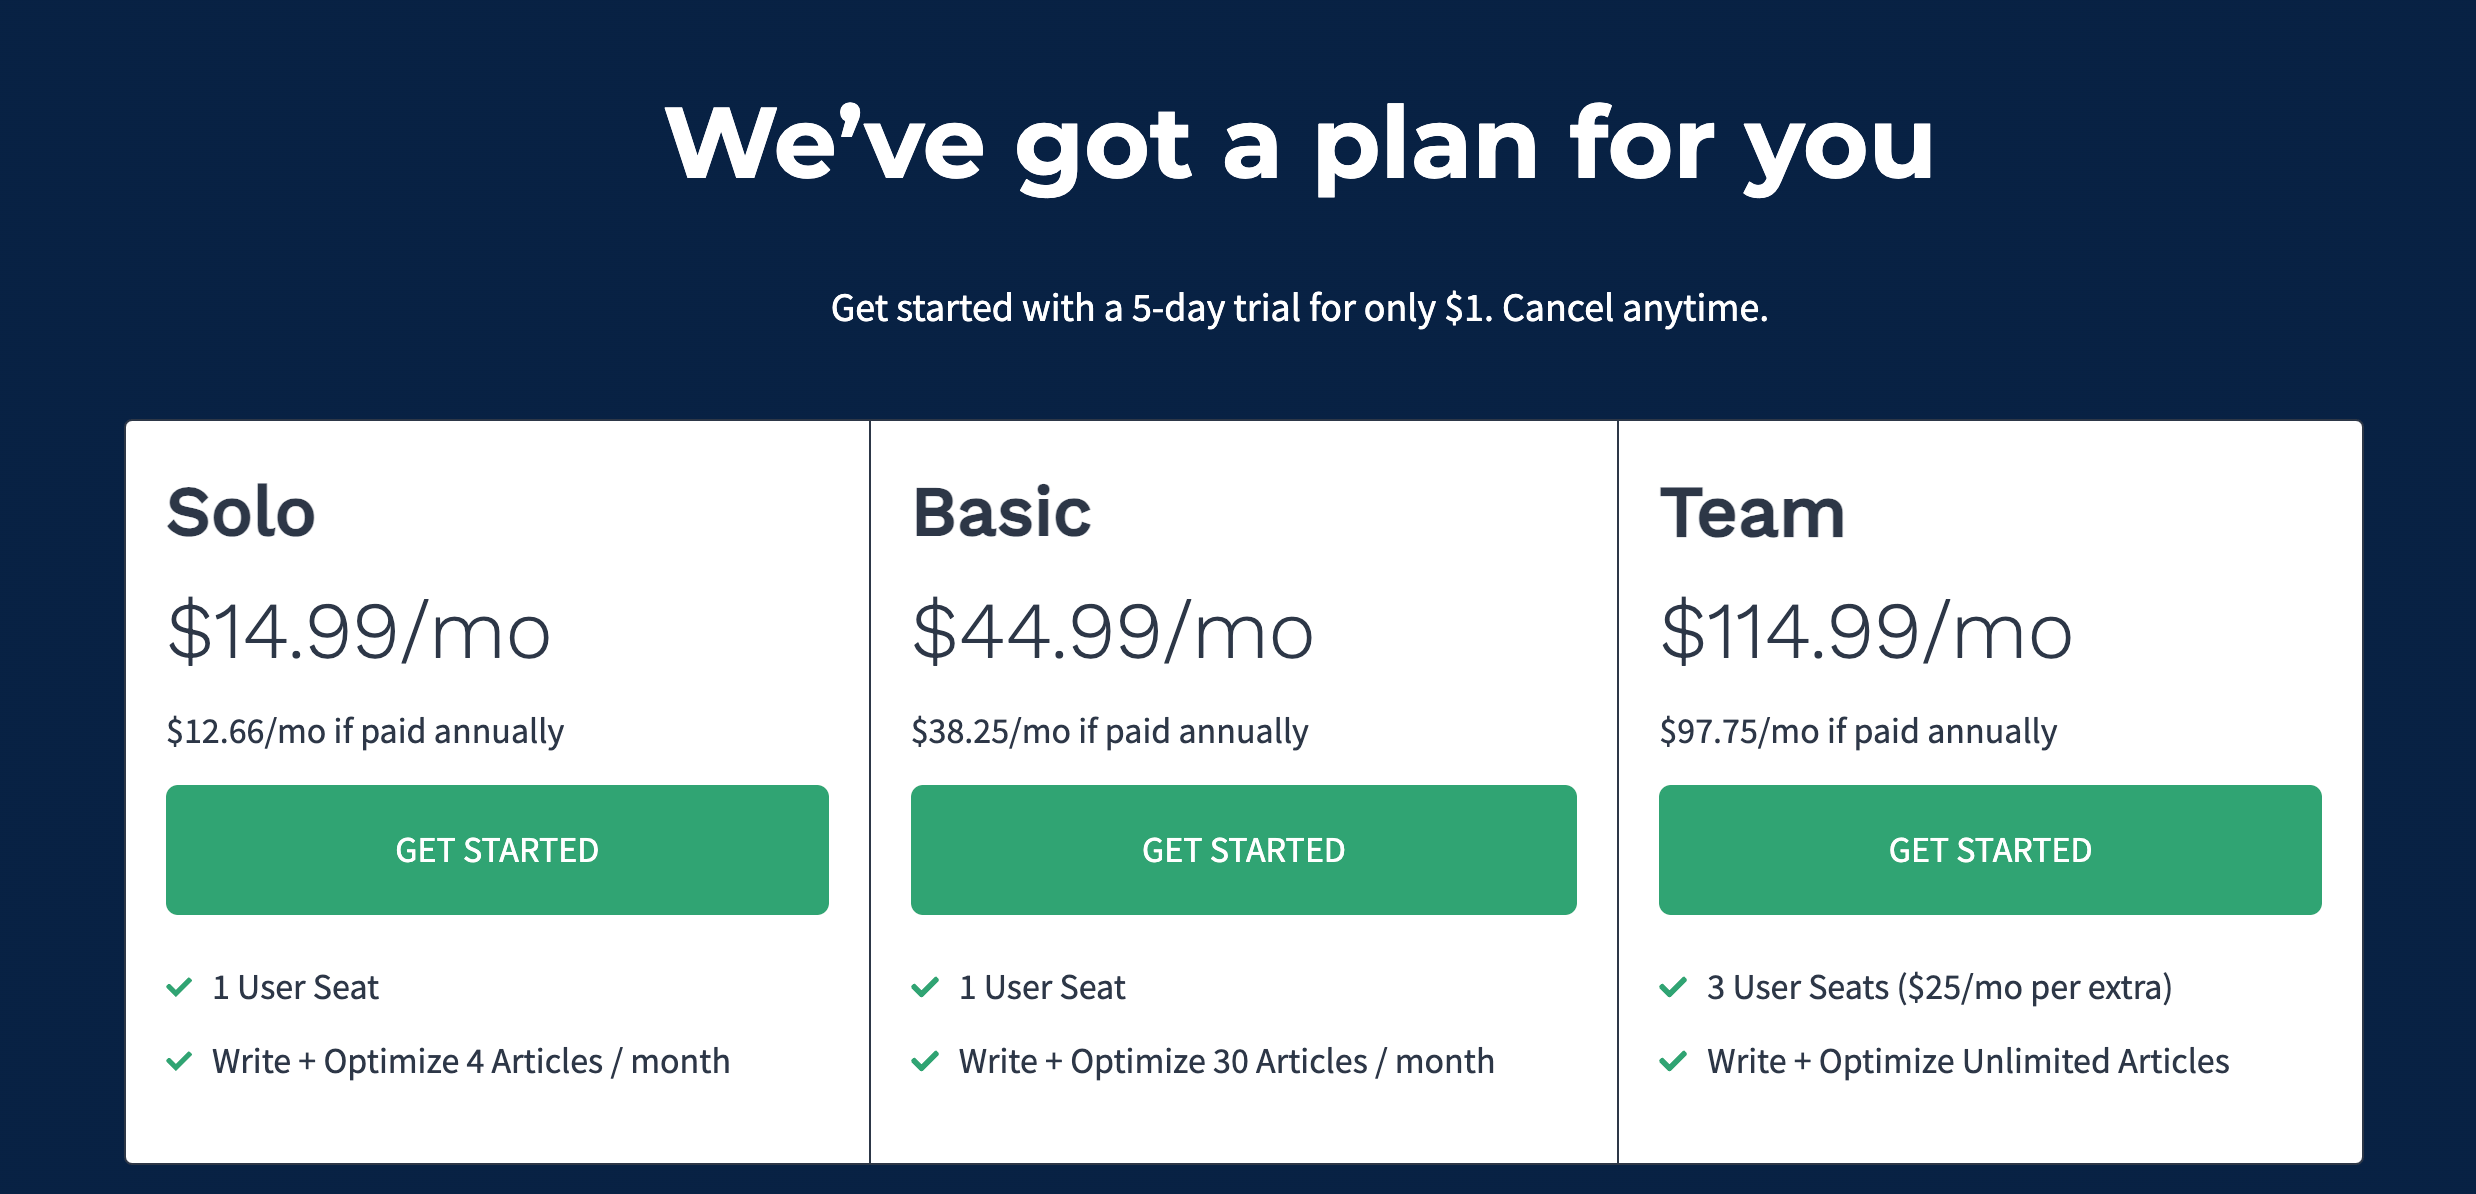 Frase's pricing options from their website